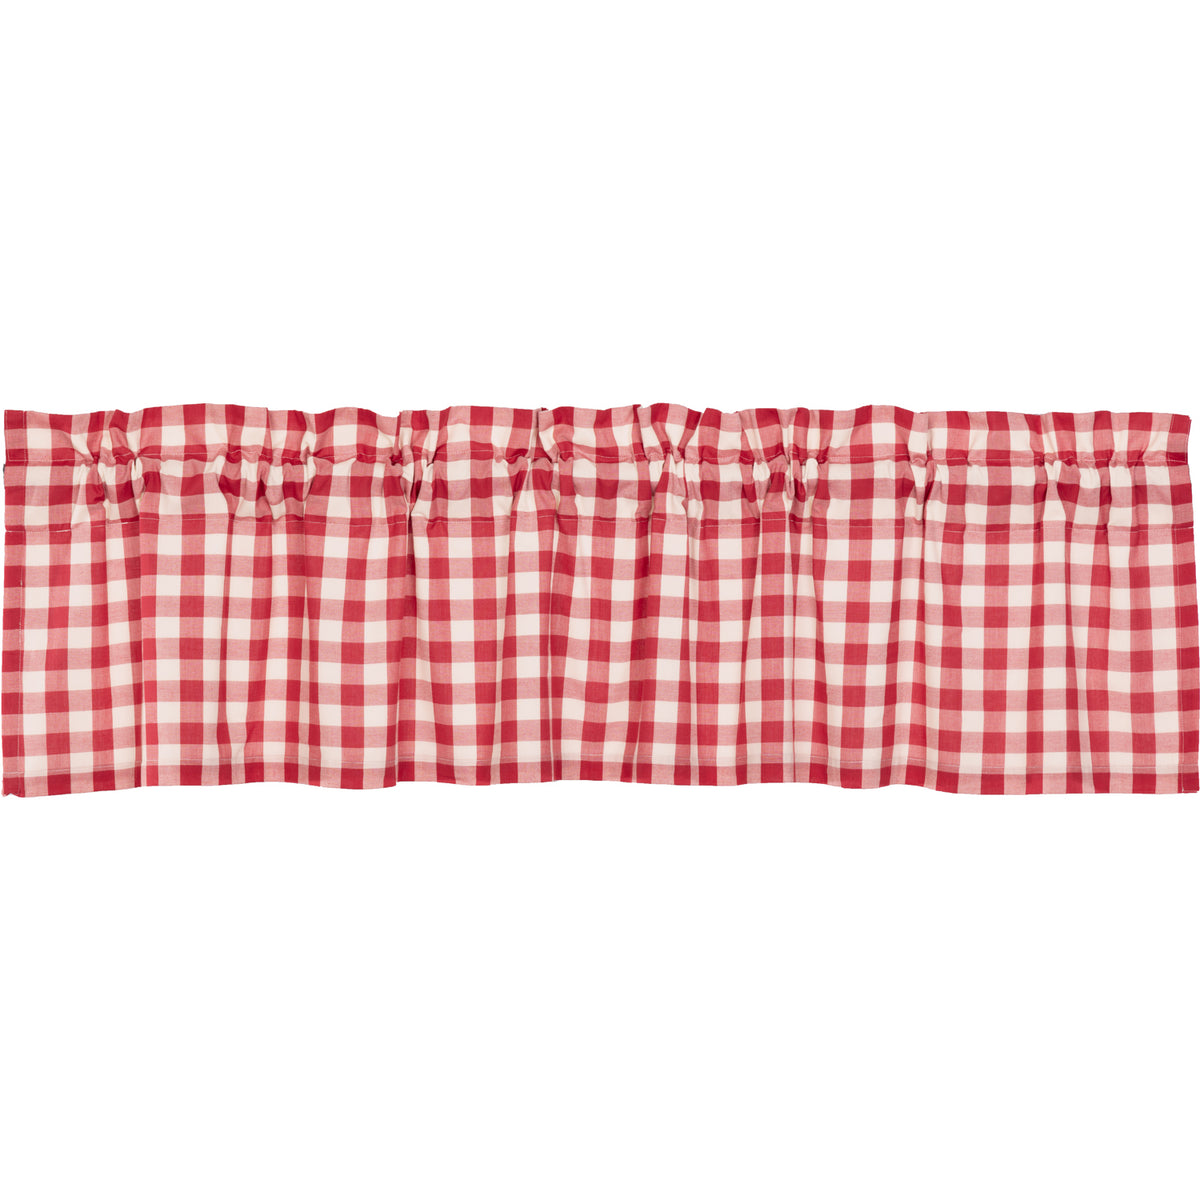 April & Olive Annie Buffalo Red Check Valance 16x72 By VHC Brands